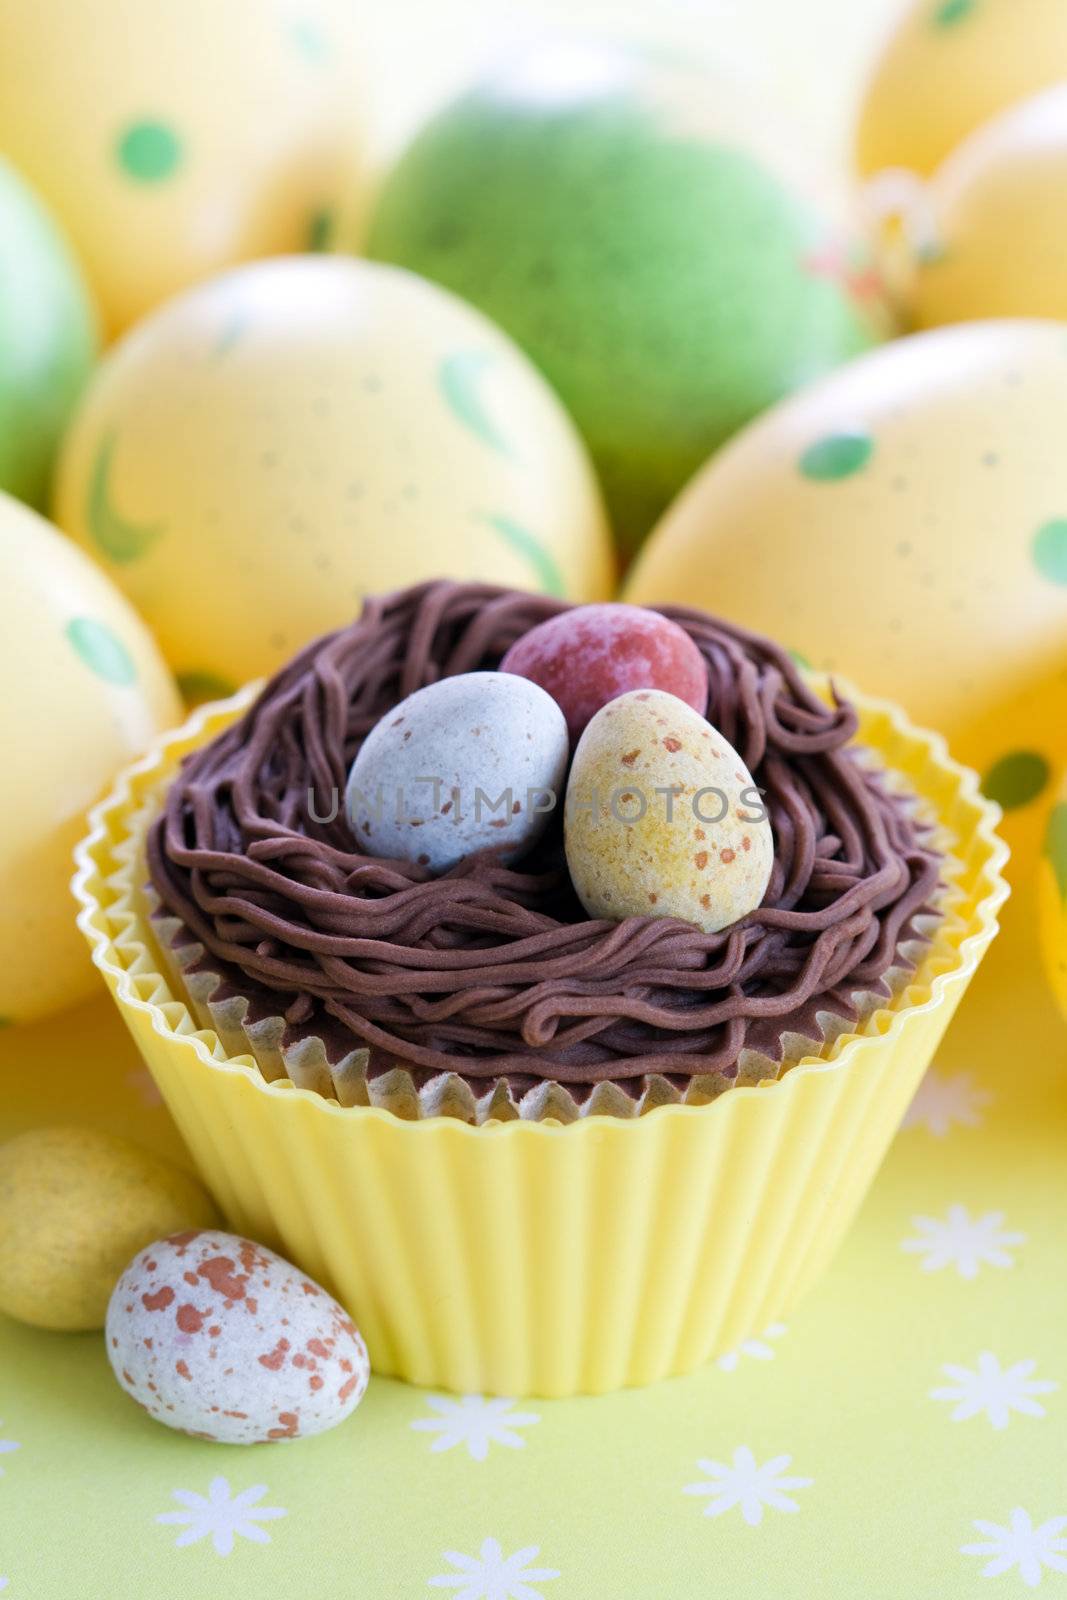 Cupcake decorated with an Easter theme